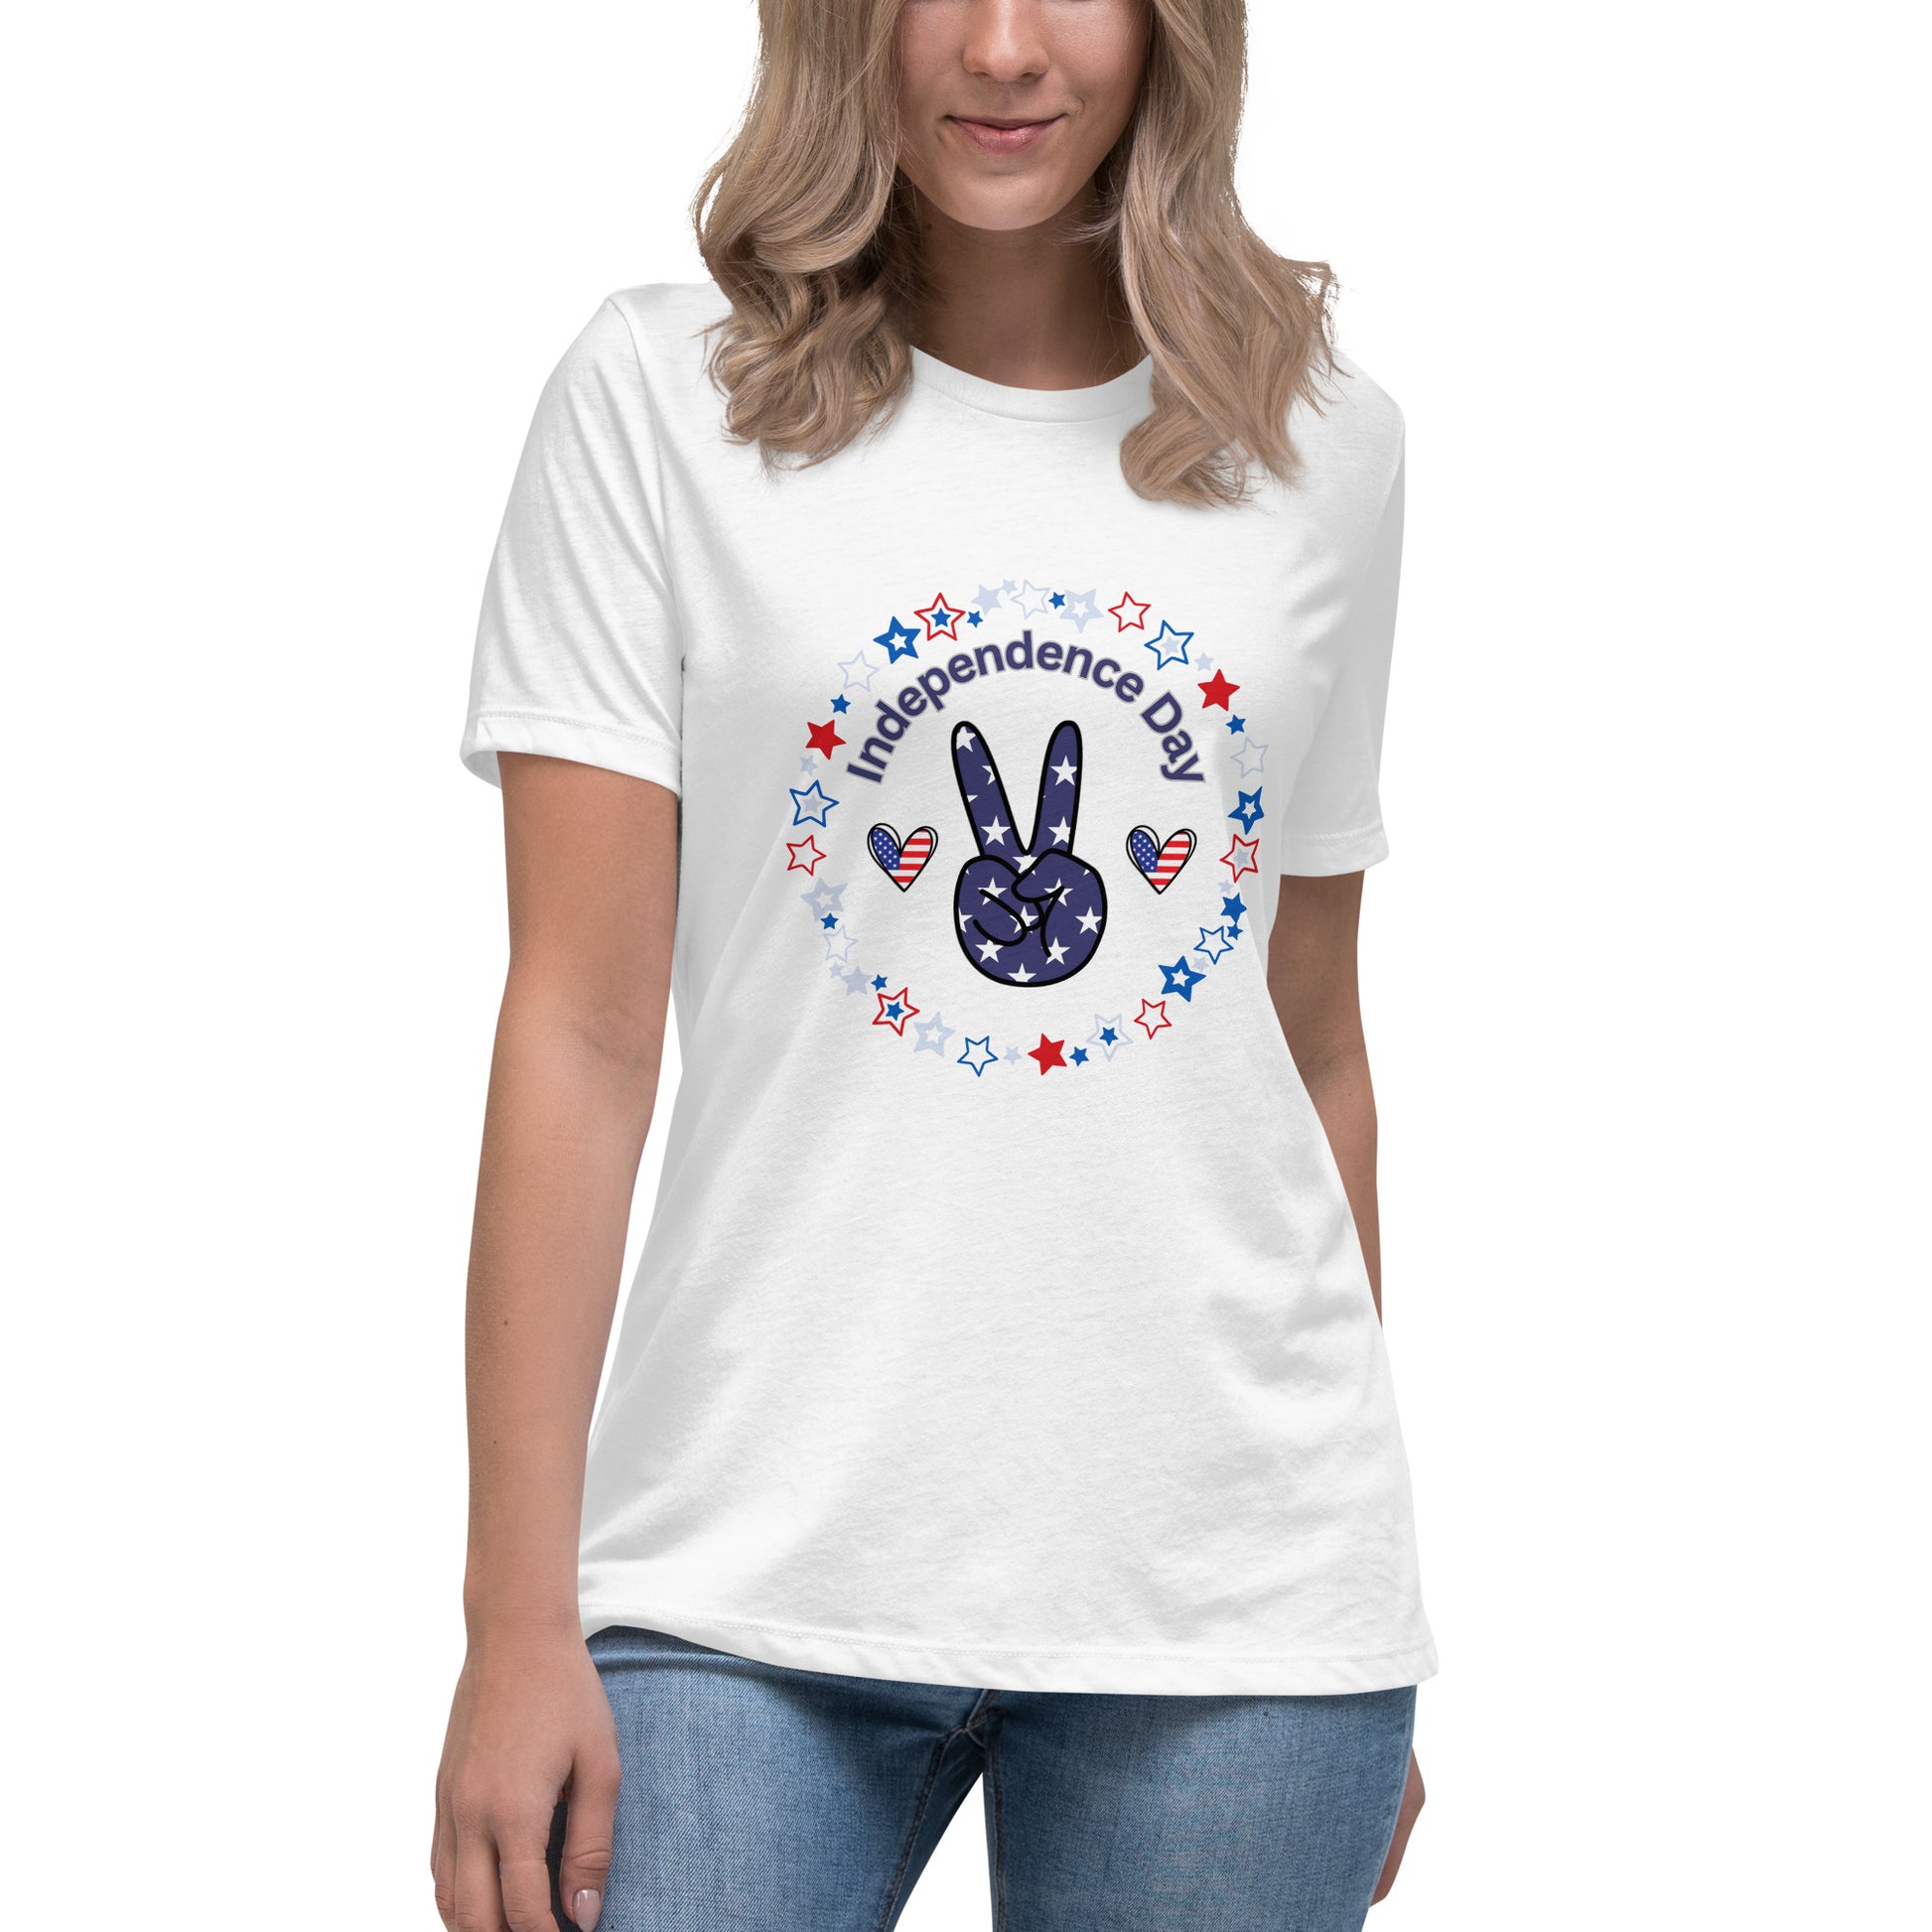 Women's Relaxed T-Shirt - Independence Day 4th of July T-shirt Stylin' Spirit White S 